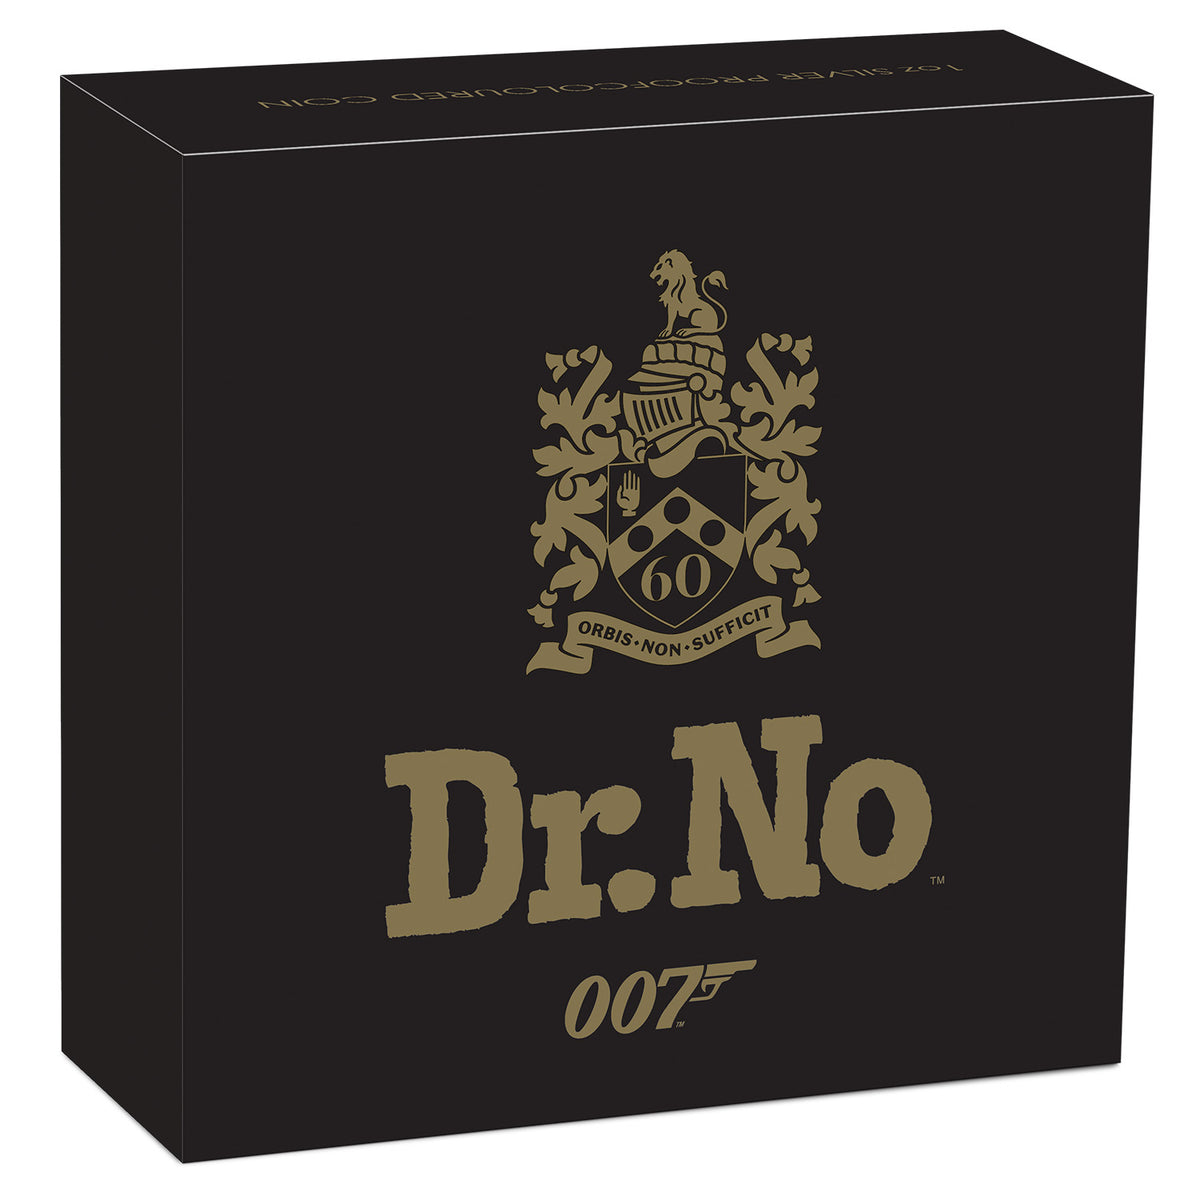 James Bond Dr. No 1oz Silver Coin with Colour - Limited Edition - By The Perth Mint